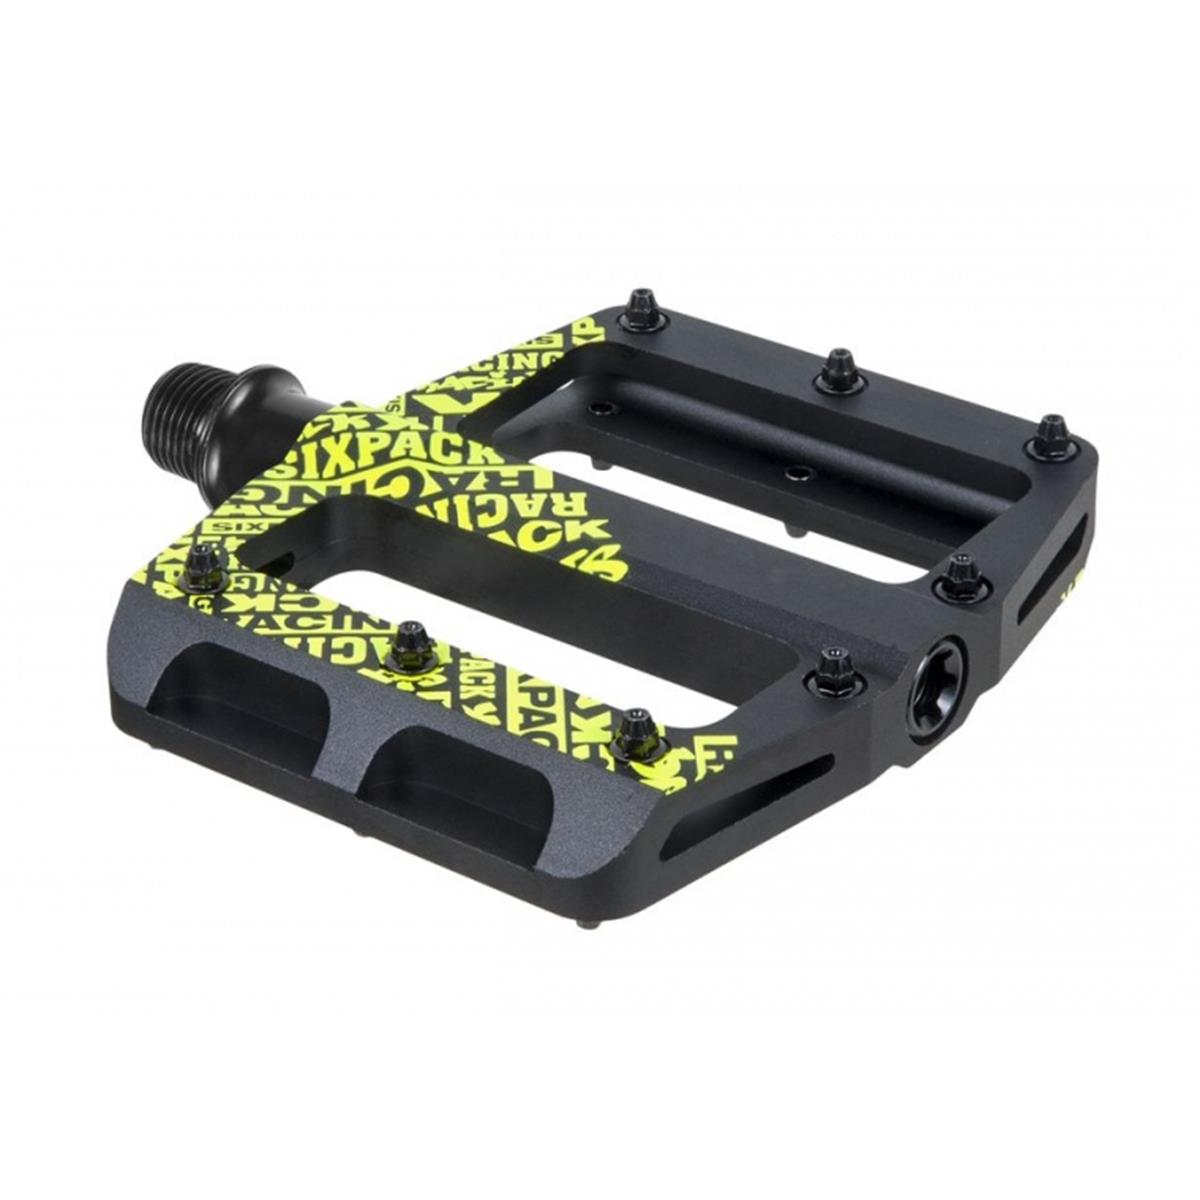 Sixpack Pedals Icon Mini Stealth Black/Neon Yellow, 85x100 mm, 32 Pins, 1 Pair